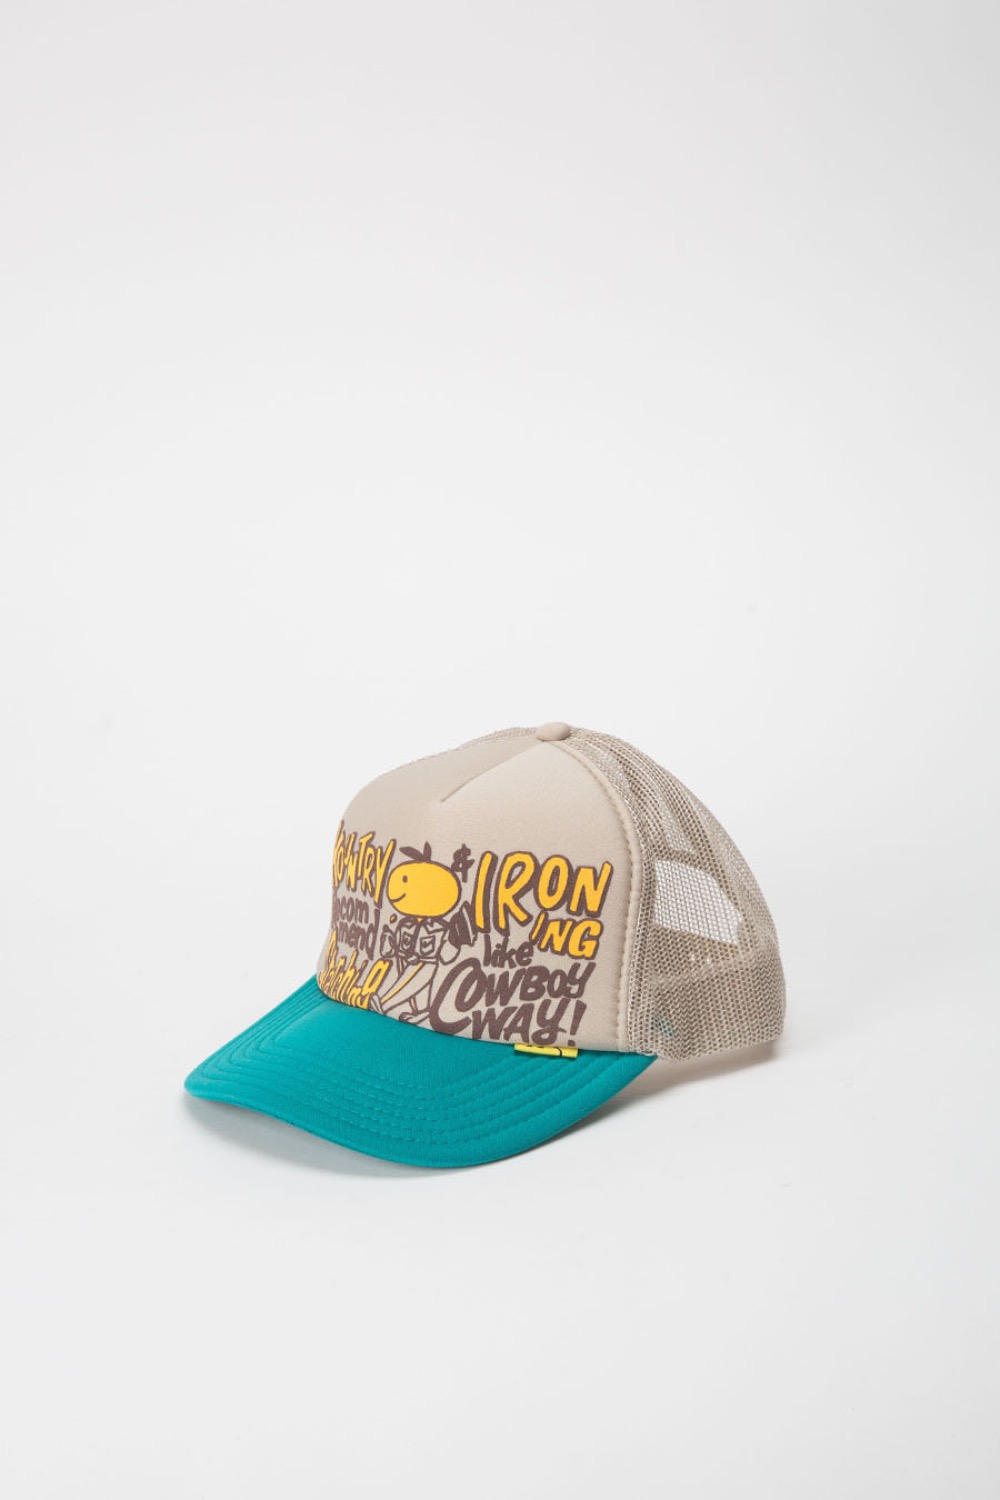 (23SS) CONEYCOWBOWY Trucker CAP BEIGE/TURQUOISE